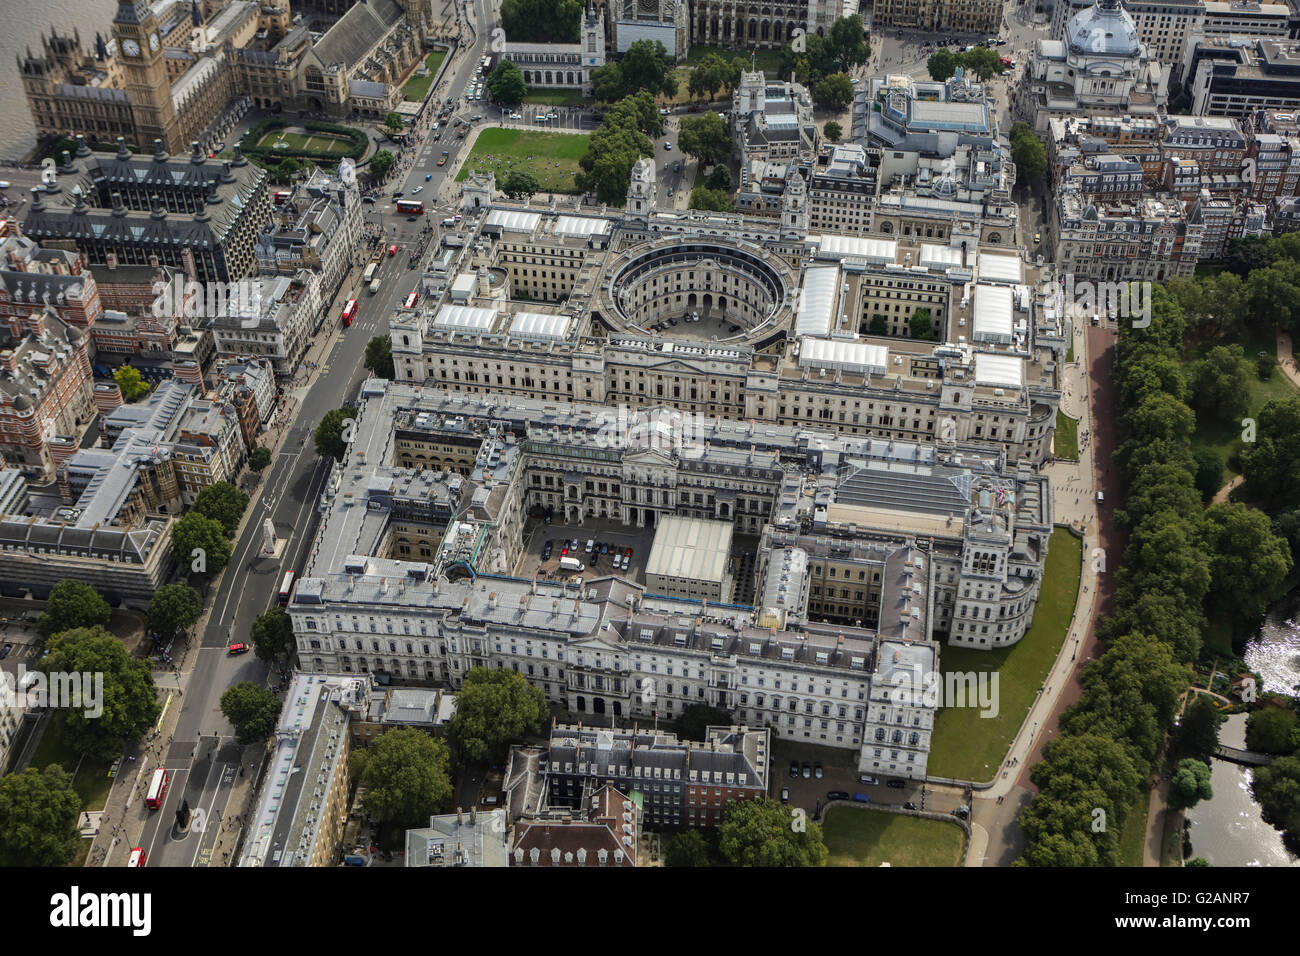 An aerial view of the Foreign Office, Treasury buildings and Cabinet Offices in Westminster, London Stock Photo